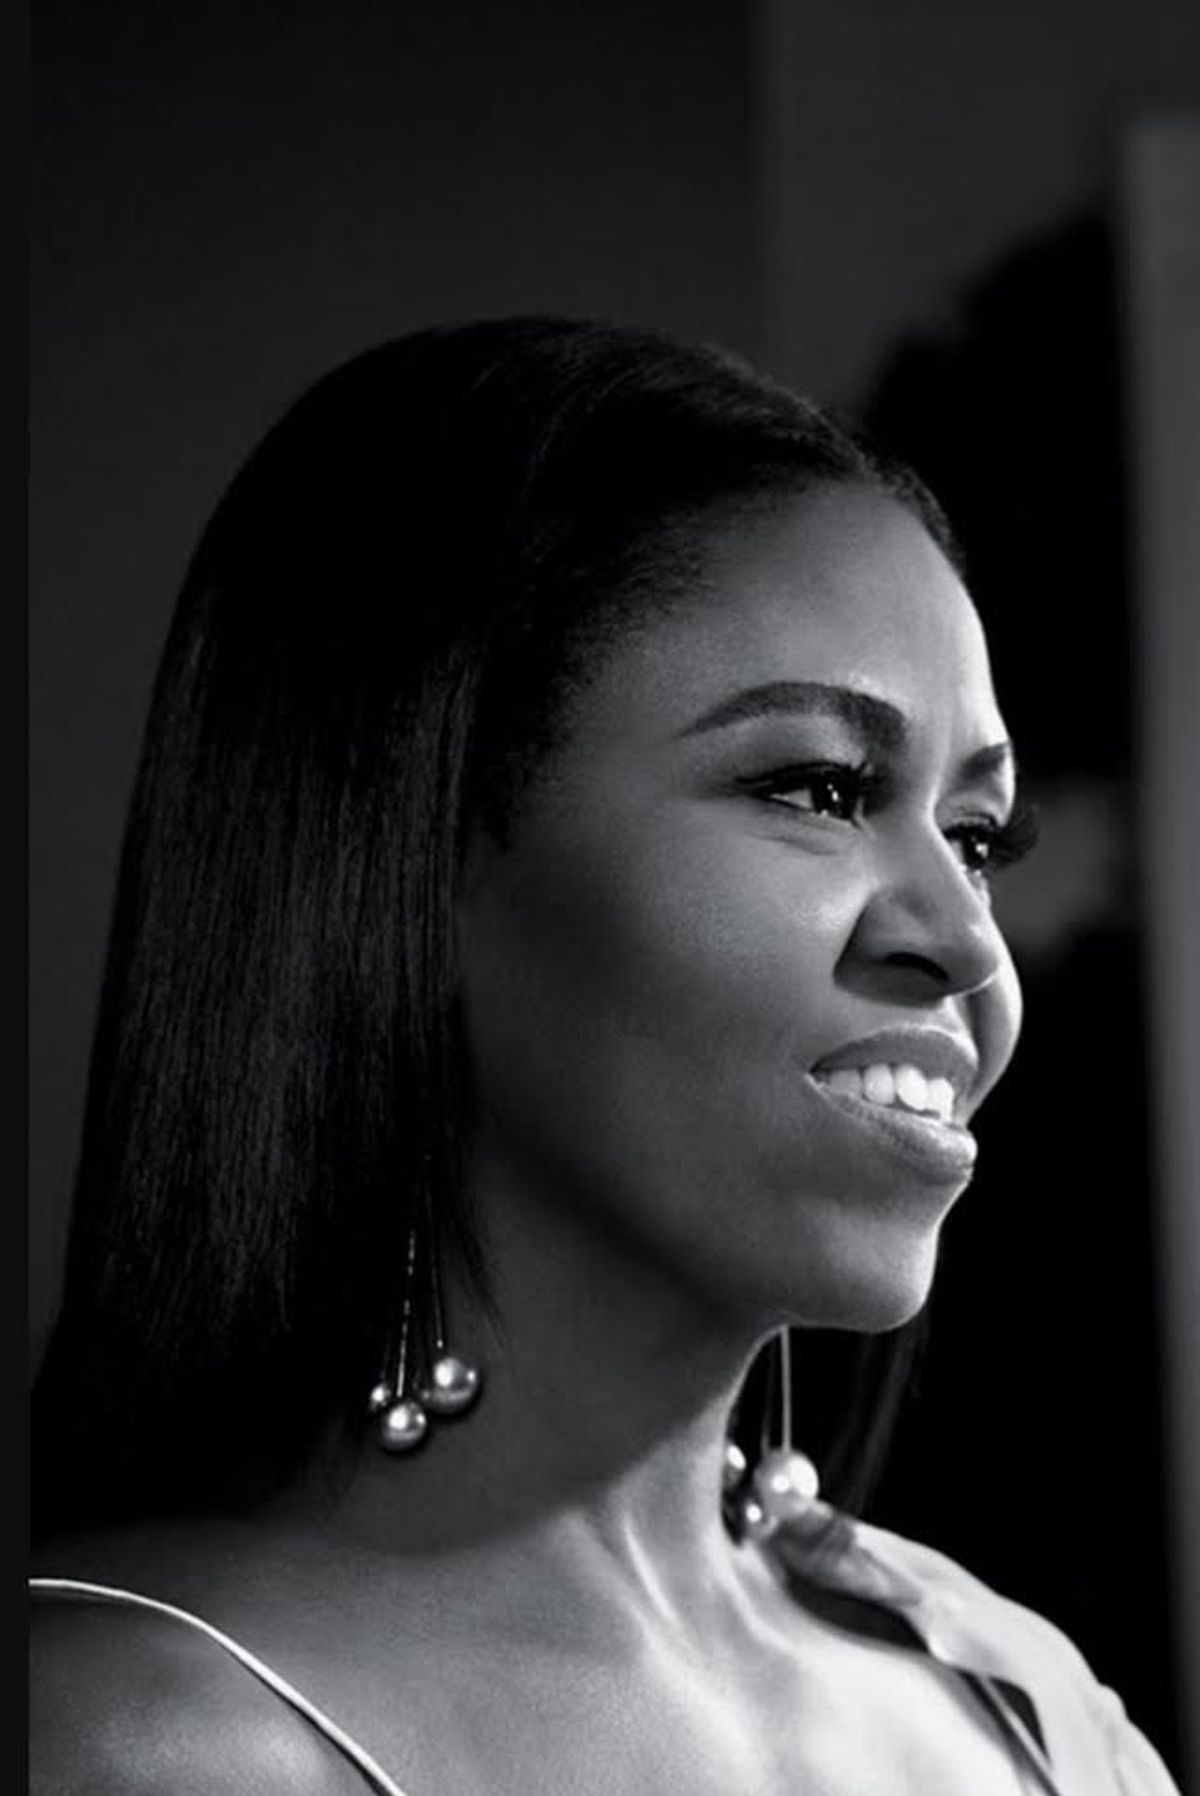 Michelle Obama is the Greatest First Lady of all time.